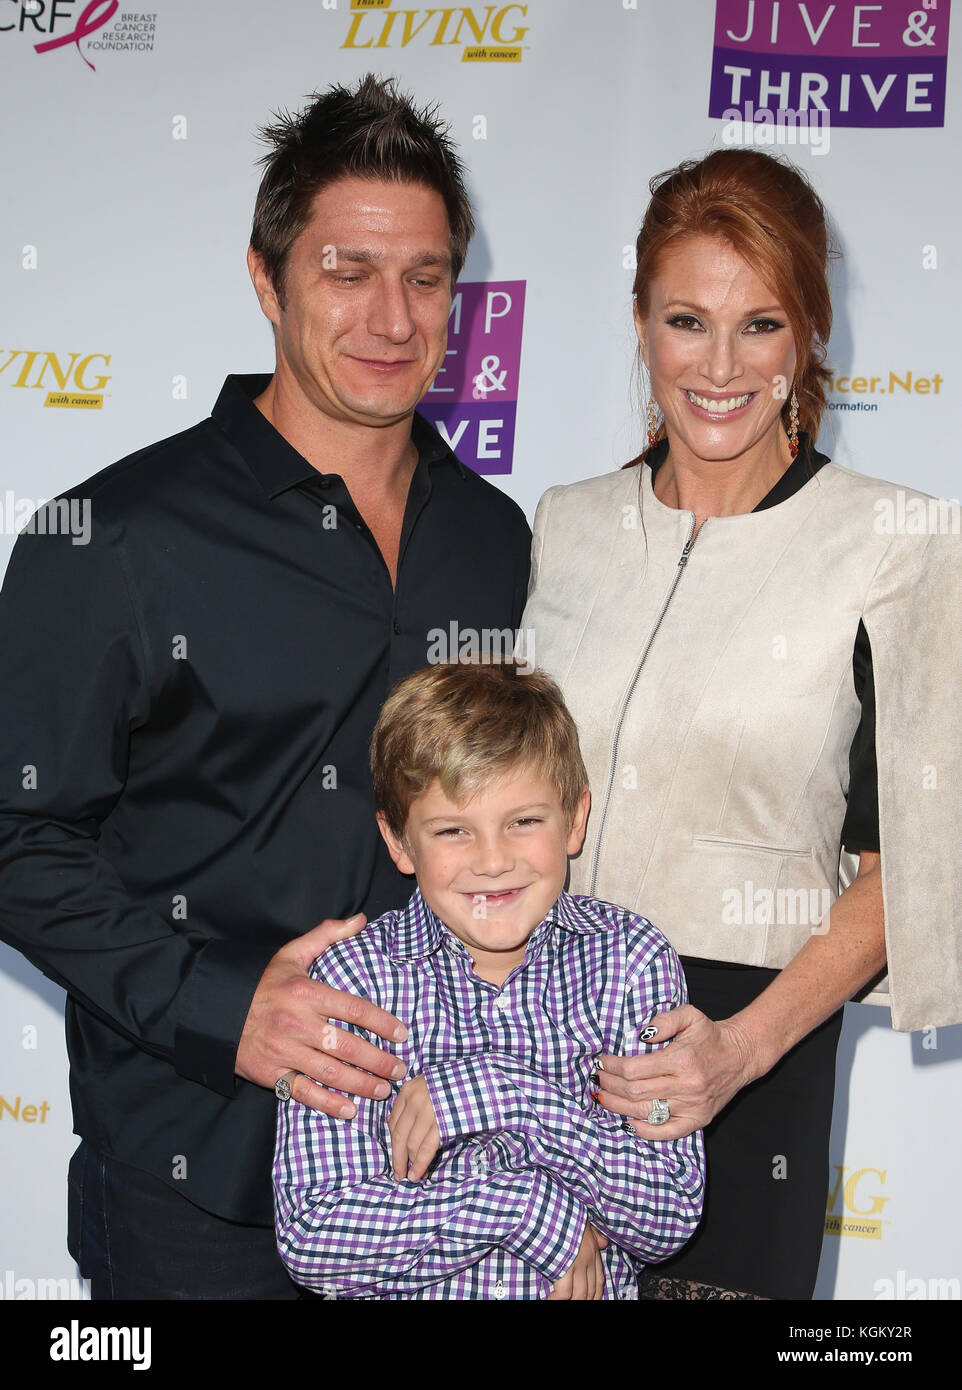 Jump Jive And Thrive Featuring: Carl Ferro, Angie Everhart, Kayden Bobby  Everhart Where: Los Angeles, California, United States When: 09 Oct 2017  Credit: FayesVision/WENN.com Stock Photo - Alamy